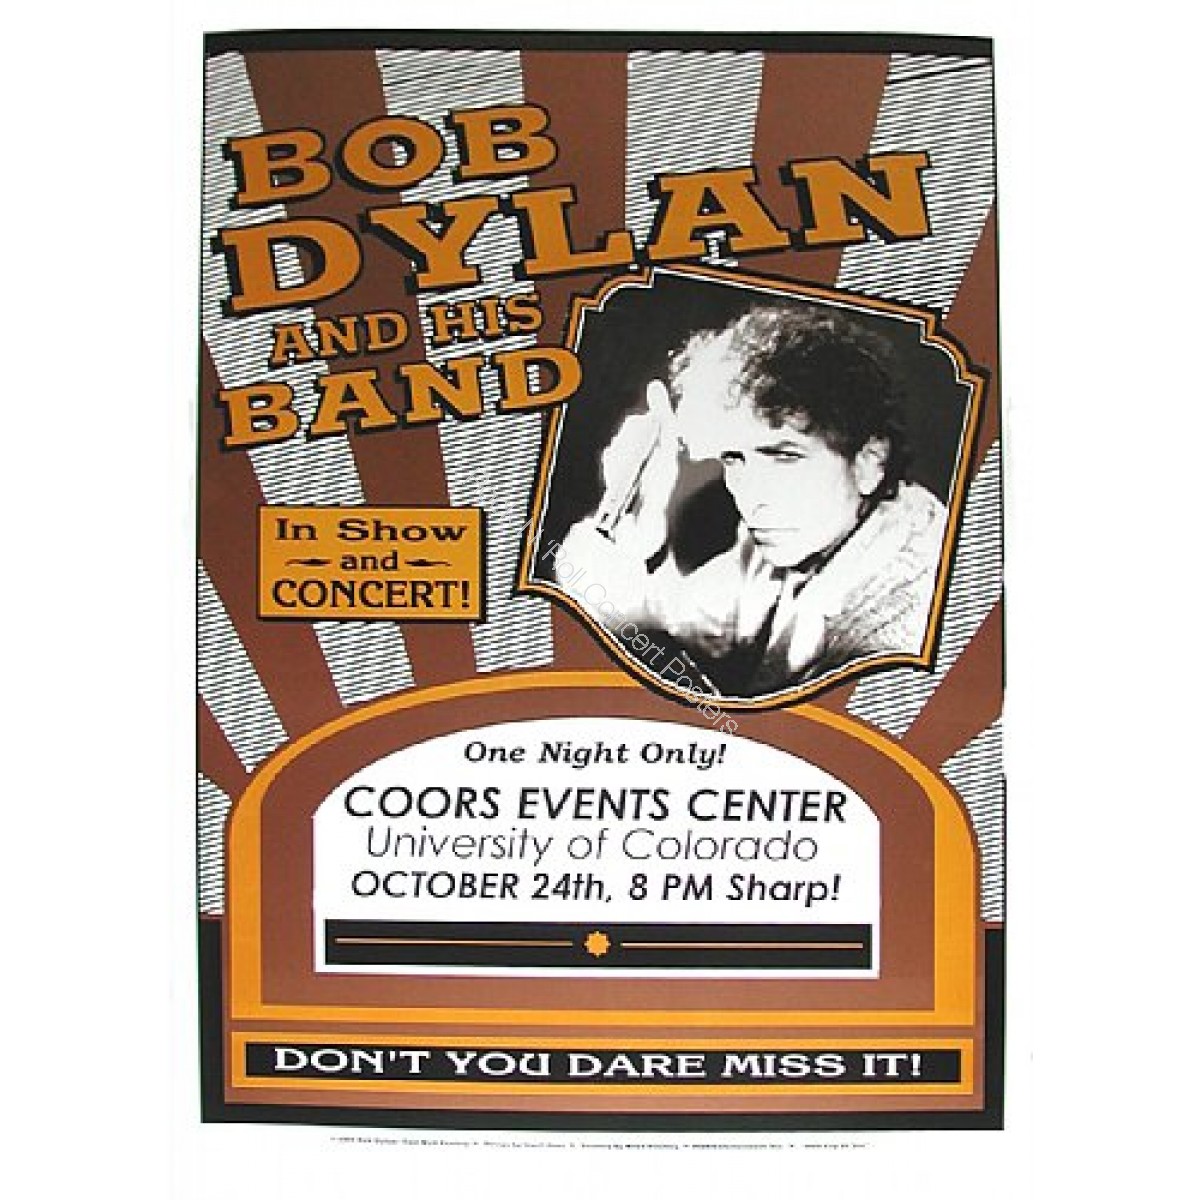 Bob Dylan Coors Event Center Boulder CO.10/24/02 Official Poster Limited edition of 200